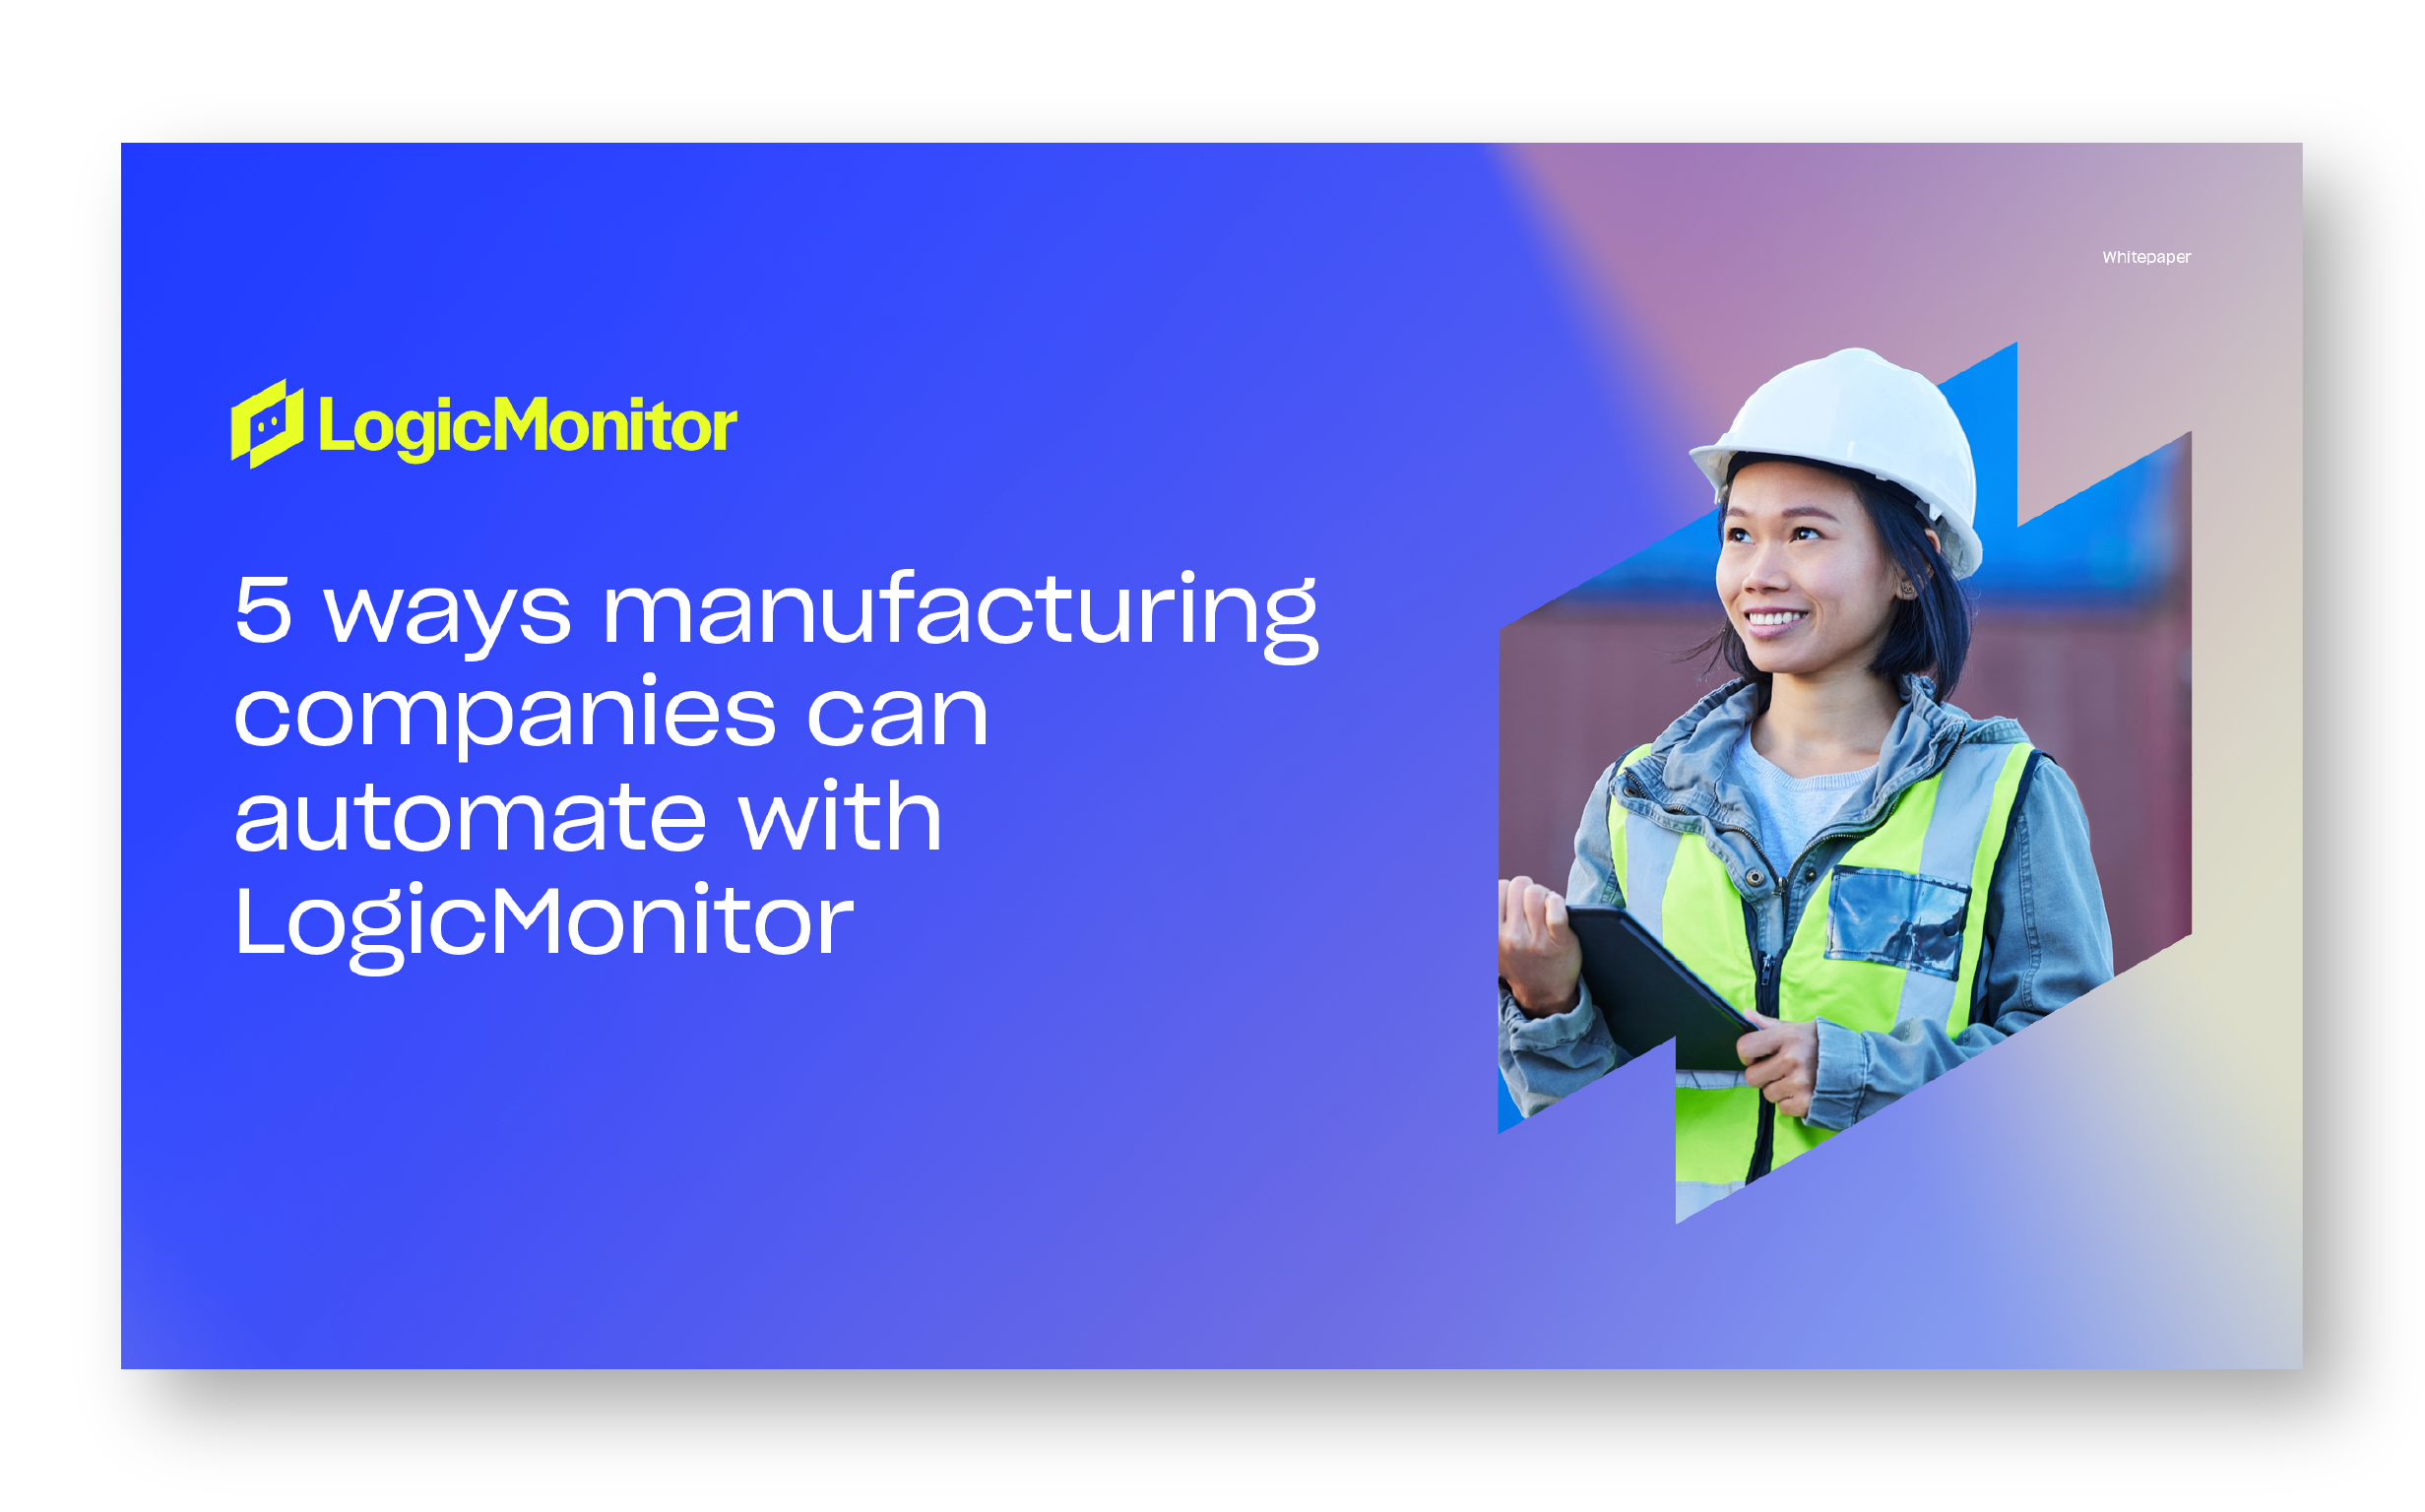 5 ways manufacturing companies can automate with LogicMonitor